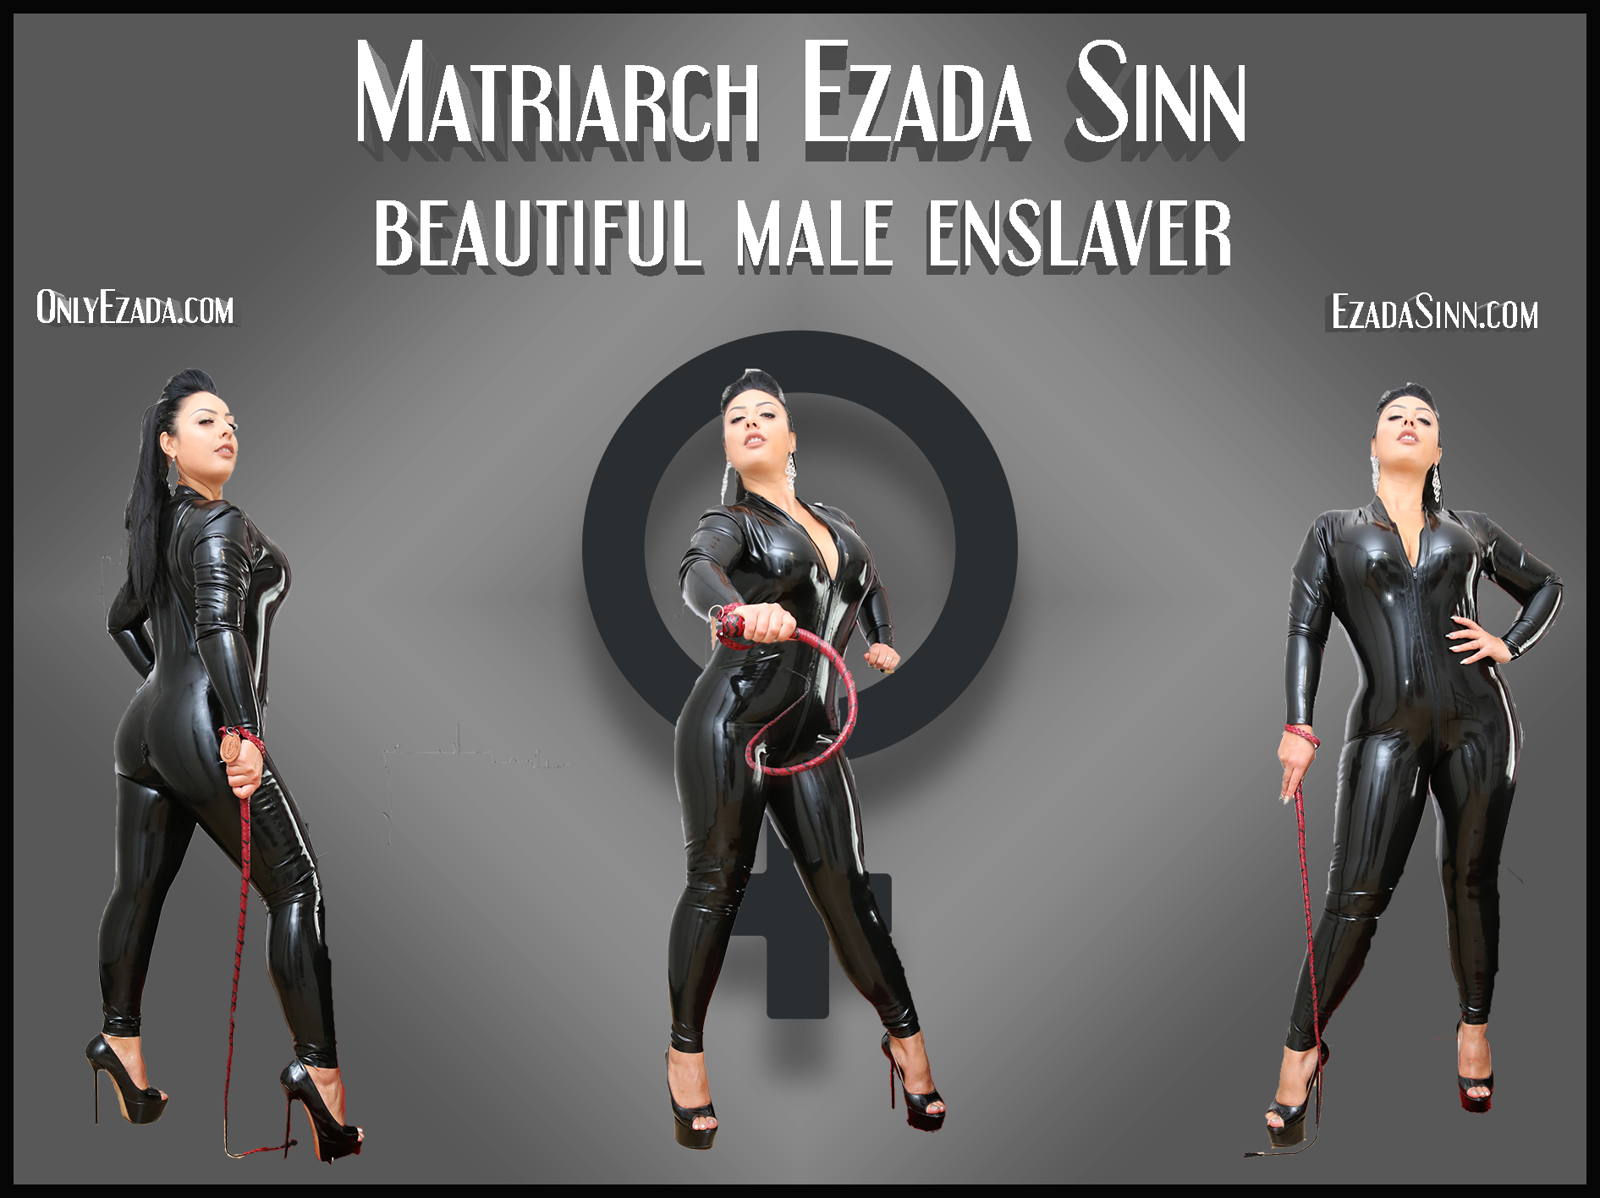 Photo by pink poodle Sinn with the username @ezadaspinkbitch,  January 12, 2020 at 11:59 AM. The post is about the topic FemDom and the text says 'Matriarch Ezada Sinn, Female Supremacist and Enslaver of males.

Begin your training: OnlyEzada.com
Buy Stapana's clips: EzadaSinn.com SinnClips.com
#FemDom #Ezada'